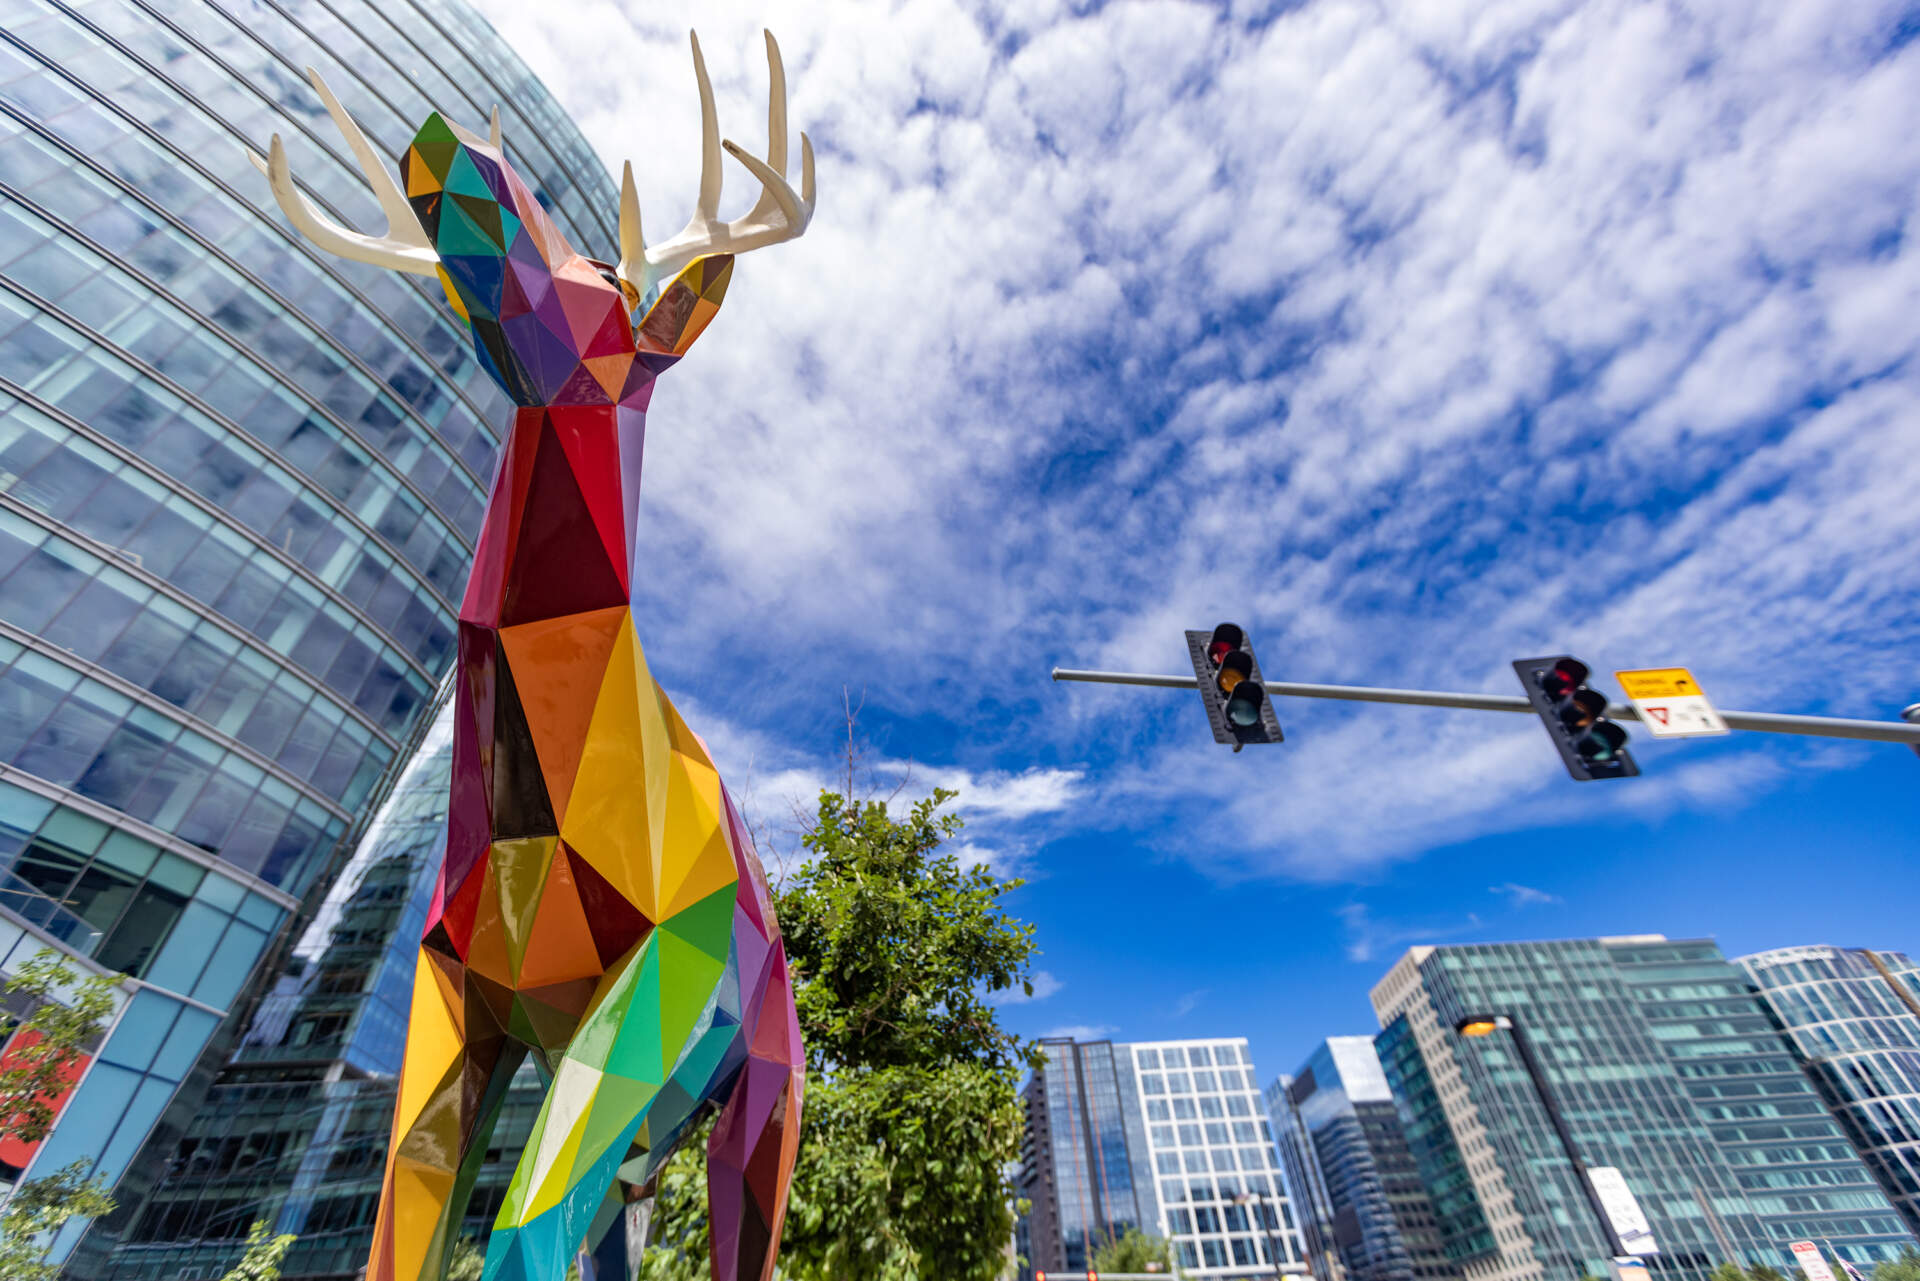 The multi-colored deer sculpture by Okuda San Miguel, which represents the wild creatures of the animal kingdom on Seaport Boulevard, stands among the tall glass buildings of the Seaport. (Jesse Costa/WBUR)